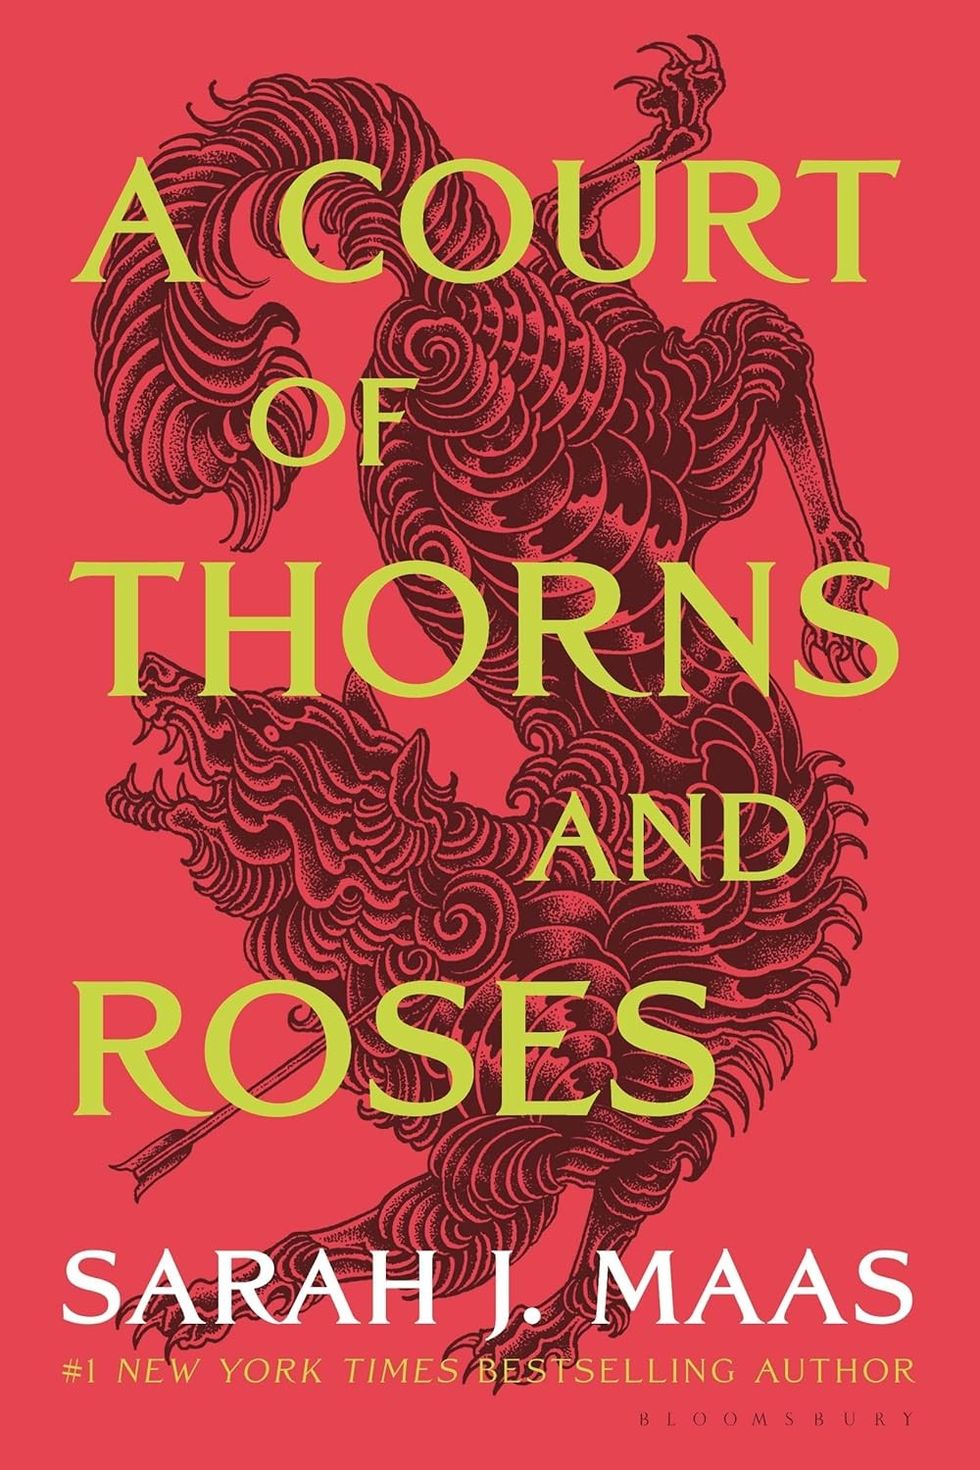 "A Court of Thorn and Roses" romantasy books